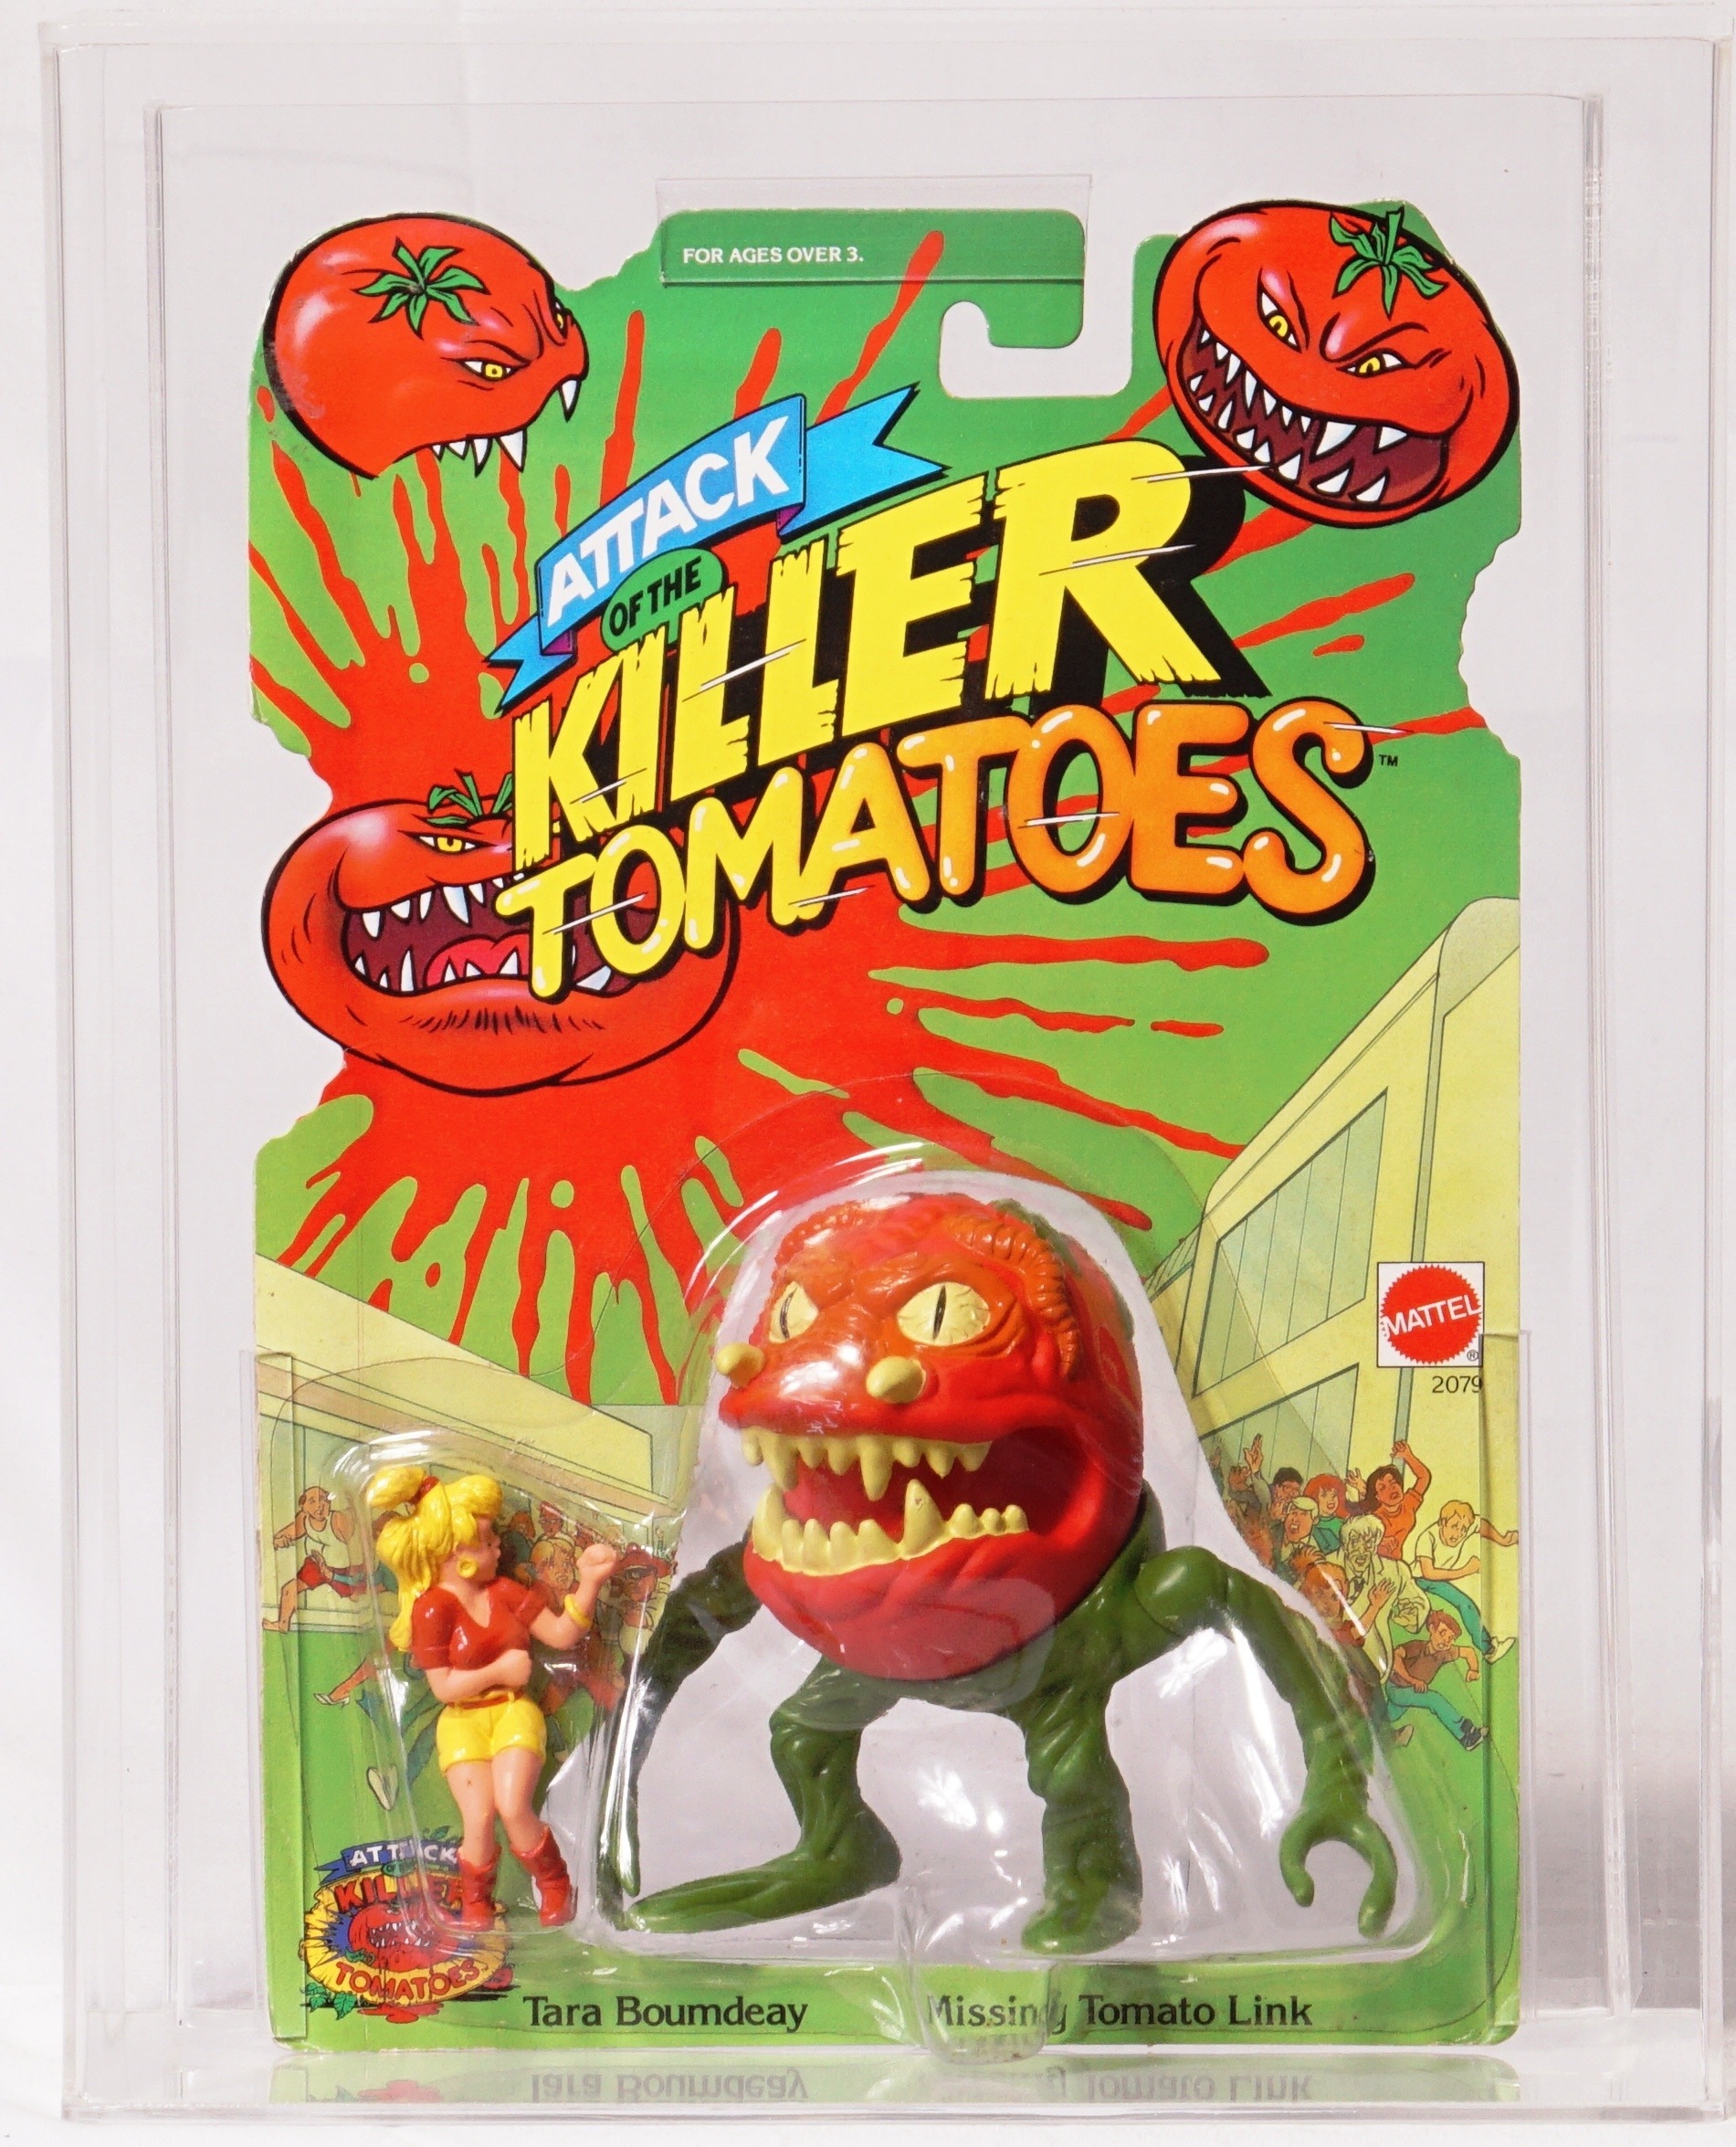 1991 Mattel Attack of the Killer Tomatoes Carded Figure - Tara Boumdeay /  Missing Tomato Link